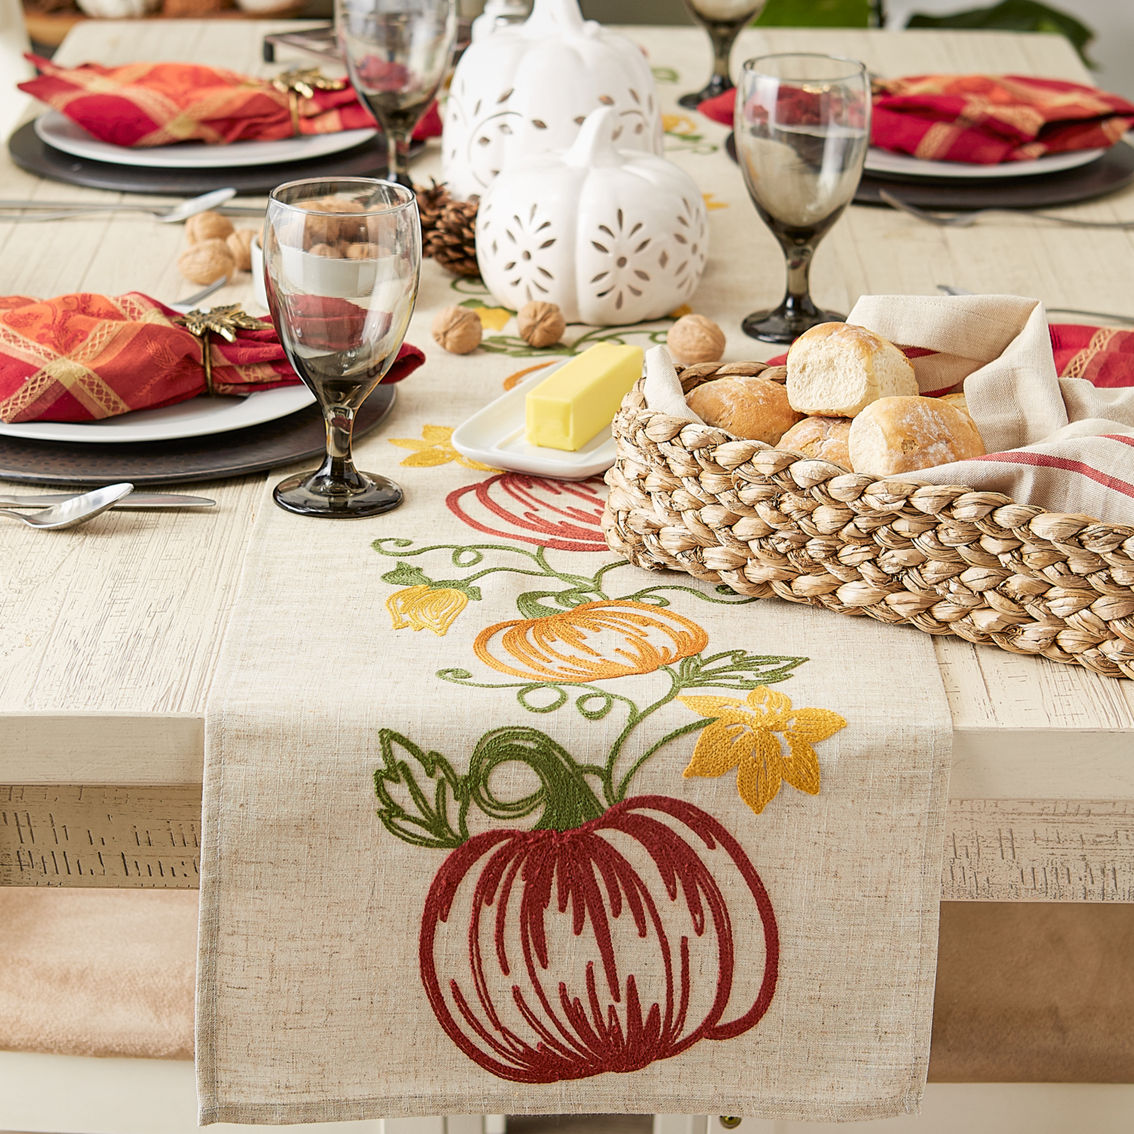 Design Imports 14 x 70 in. Pumpkin Vine Embroidered Table Runner - Image 6 of 8